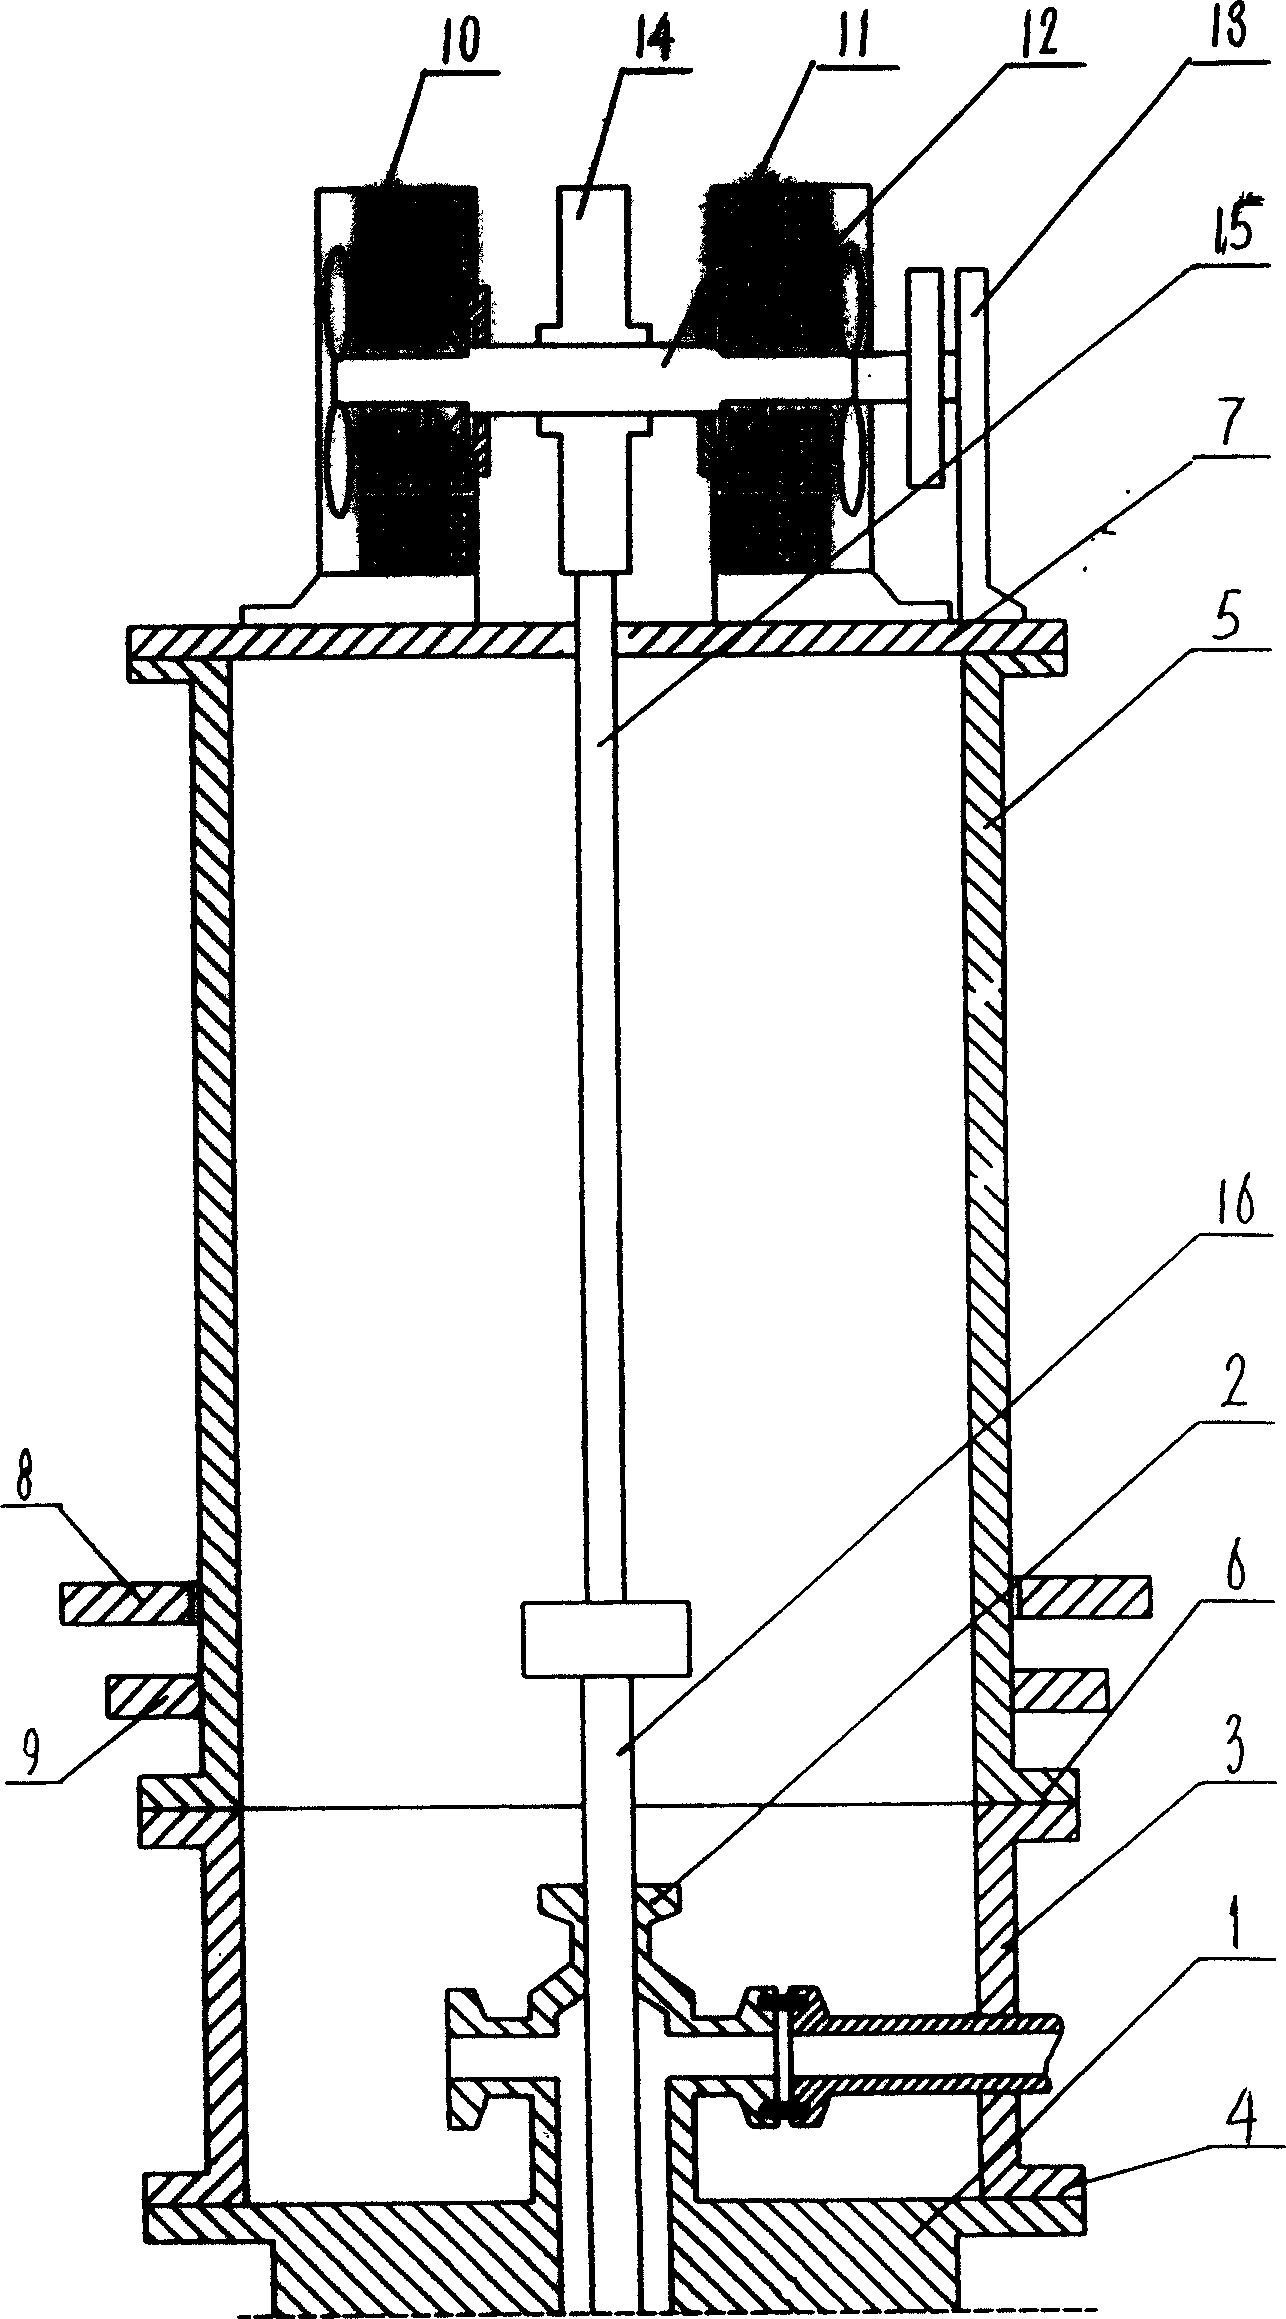 Split motor-drived vertical-pipe reciprocating chain pumping unit